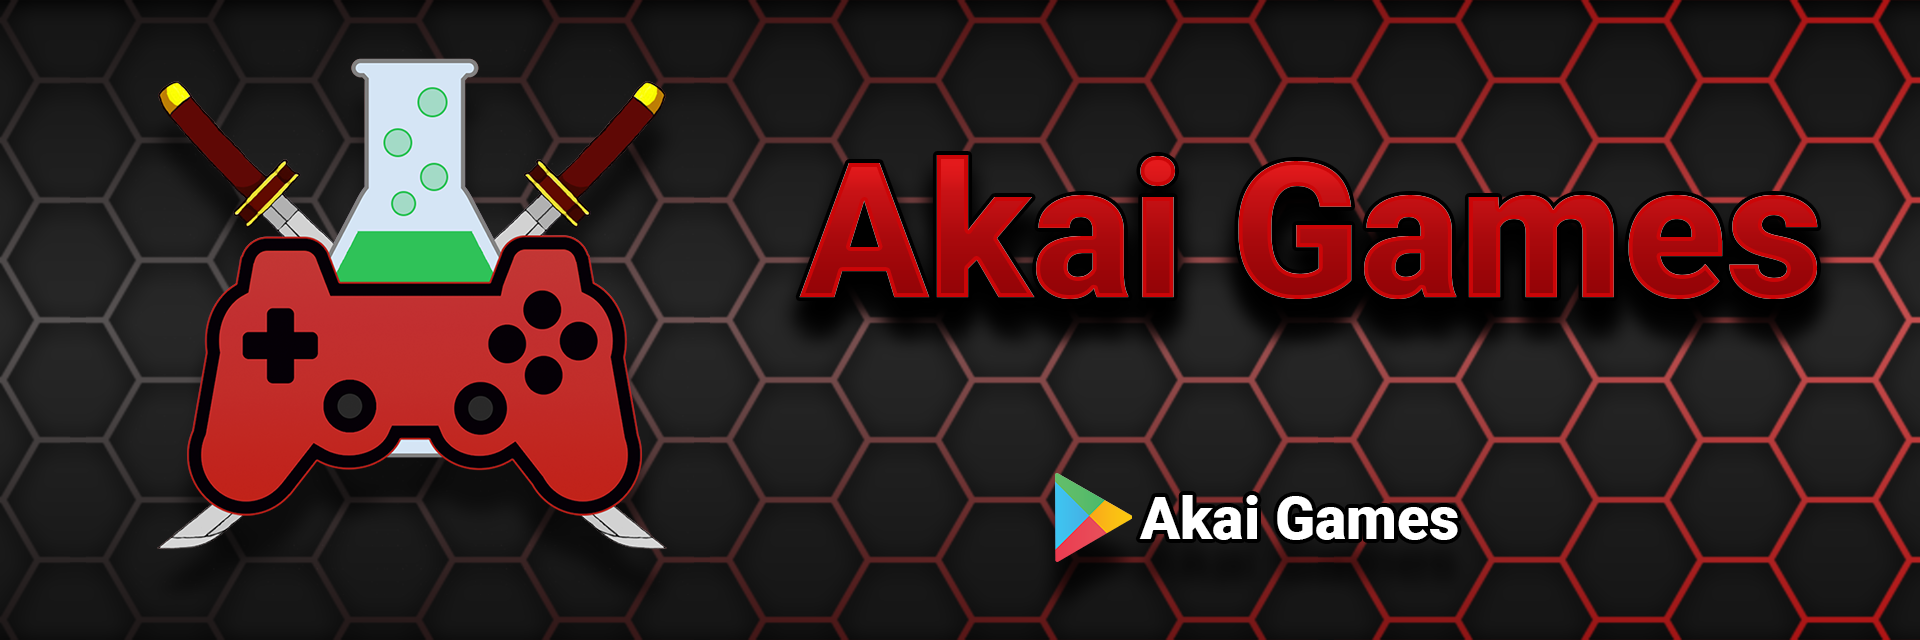 Banner AkaiGames